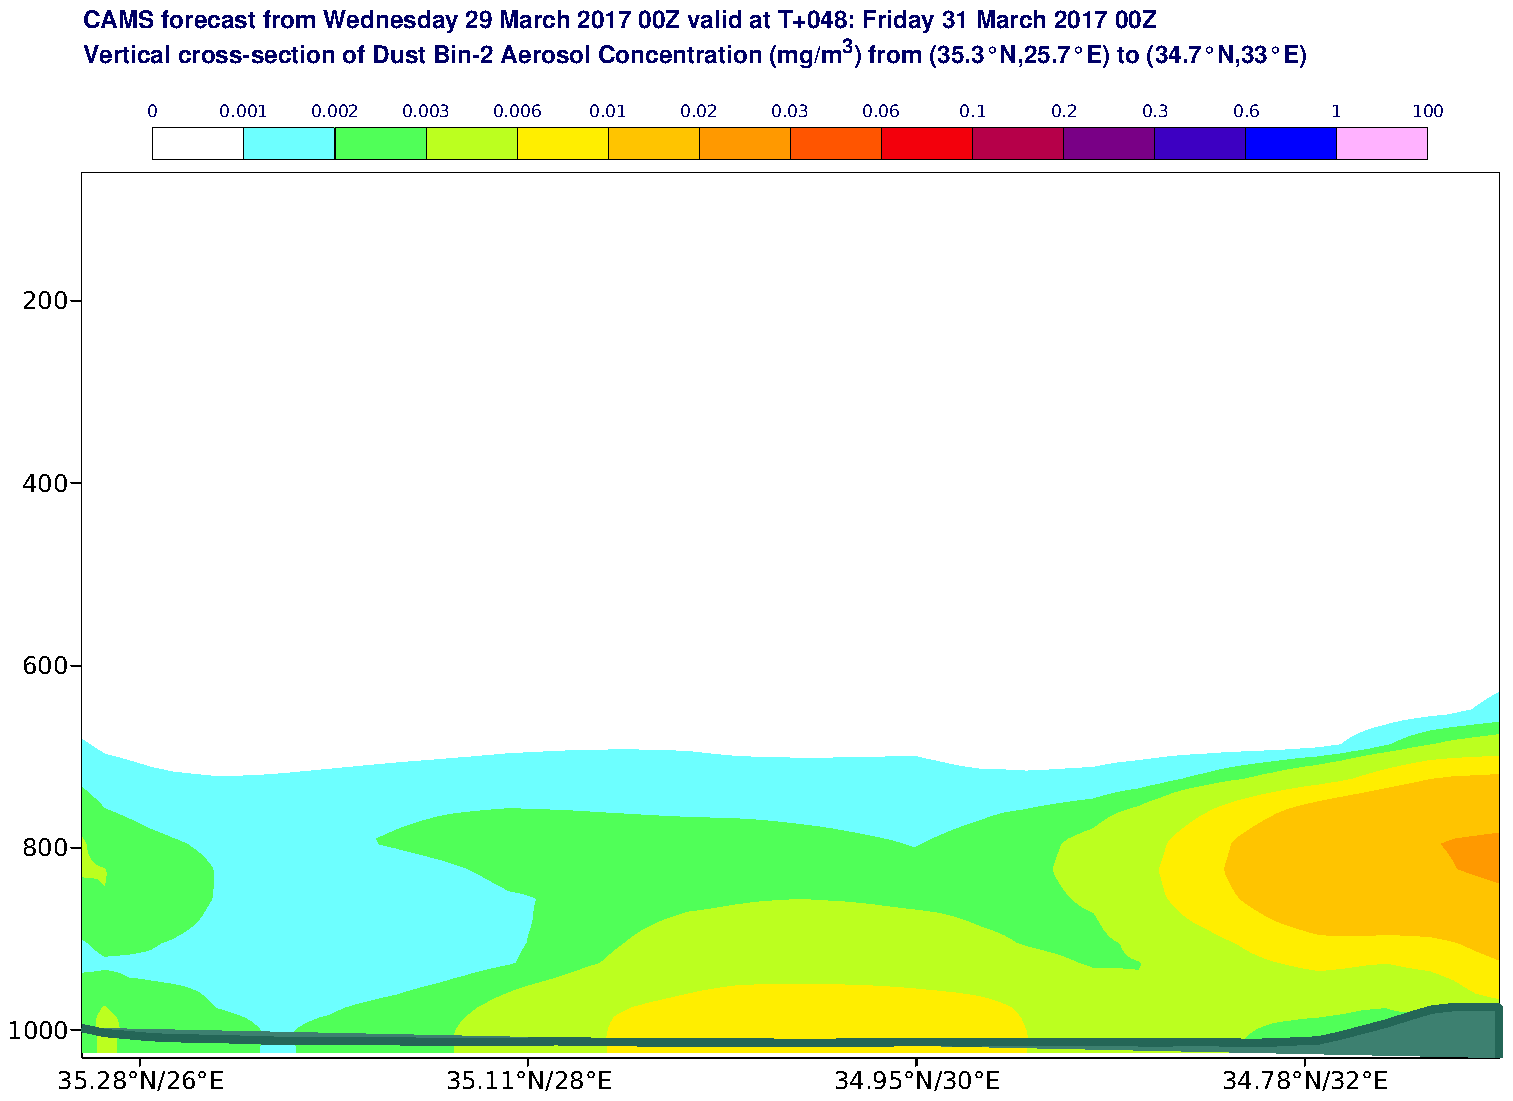 Vertical cross-section of Dust Bin-2 Aerosol Concentration (mg/m3) valid at T48 - 2017-03-31 00:00